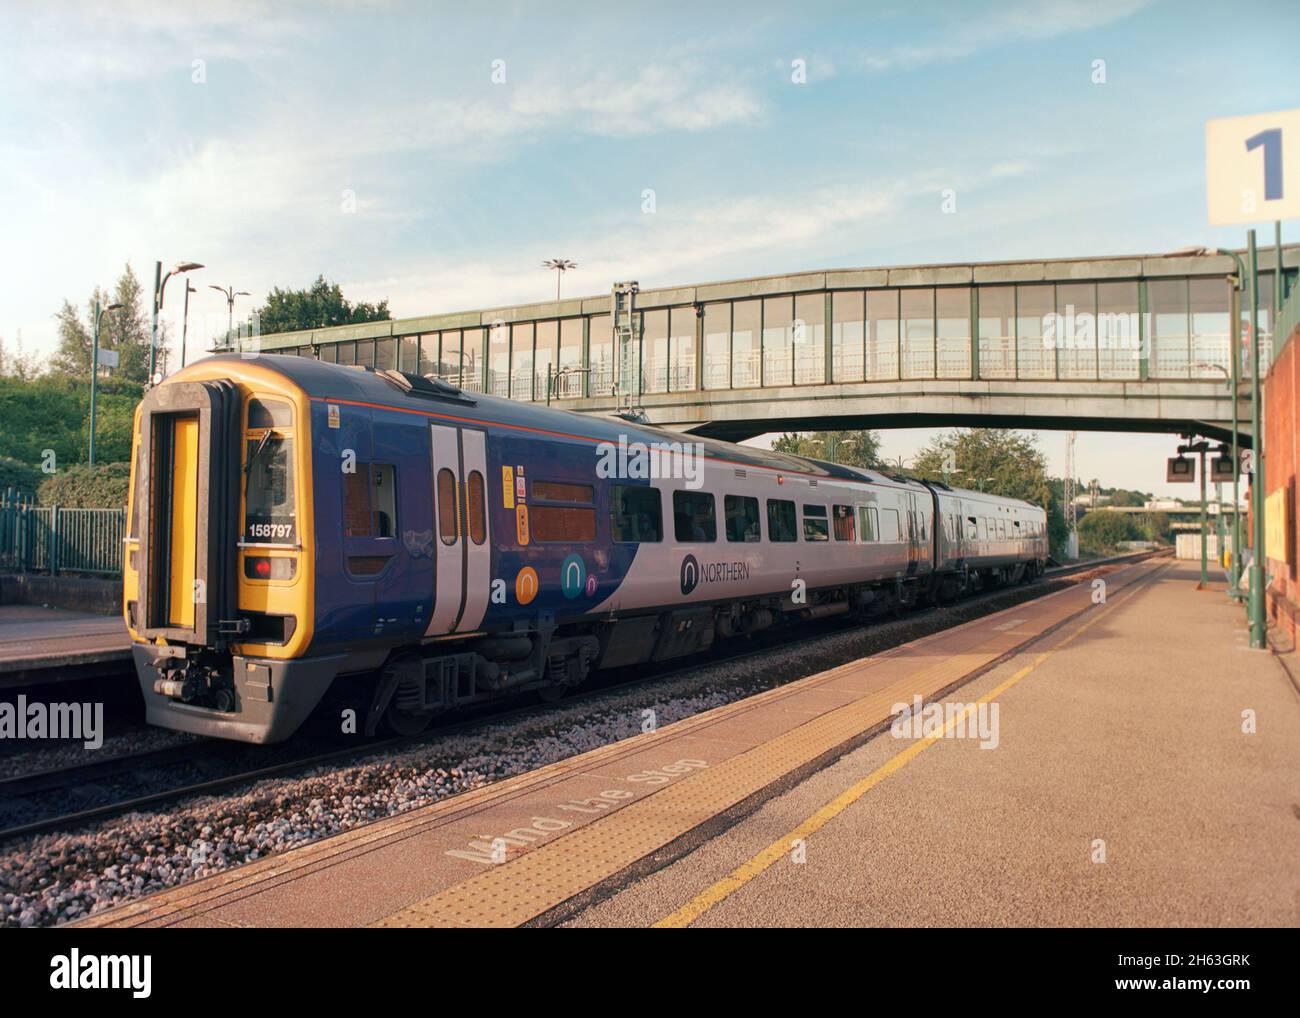 Sheffield, UK - 23 August 2021: A passenger train (Class 158) operated by Northern at Meadowhall station for commuter service. Stock Photo